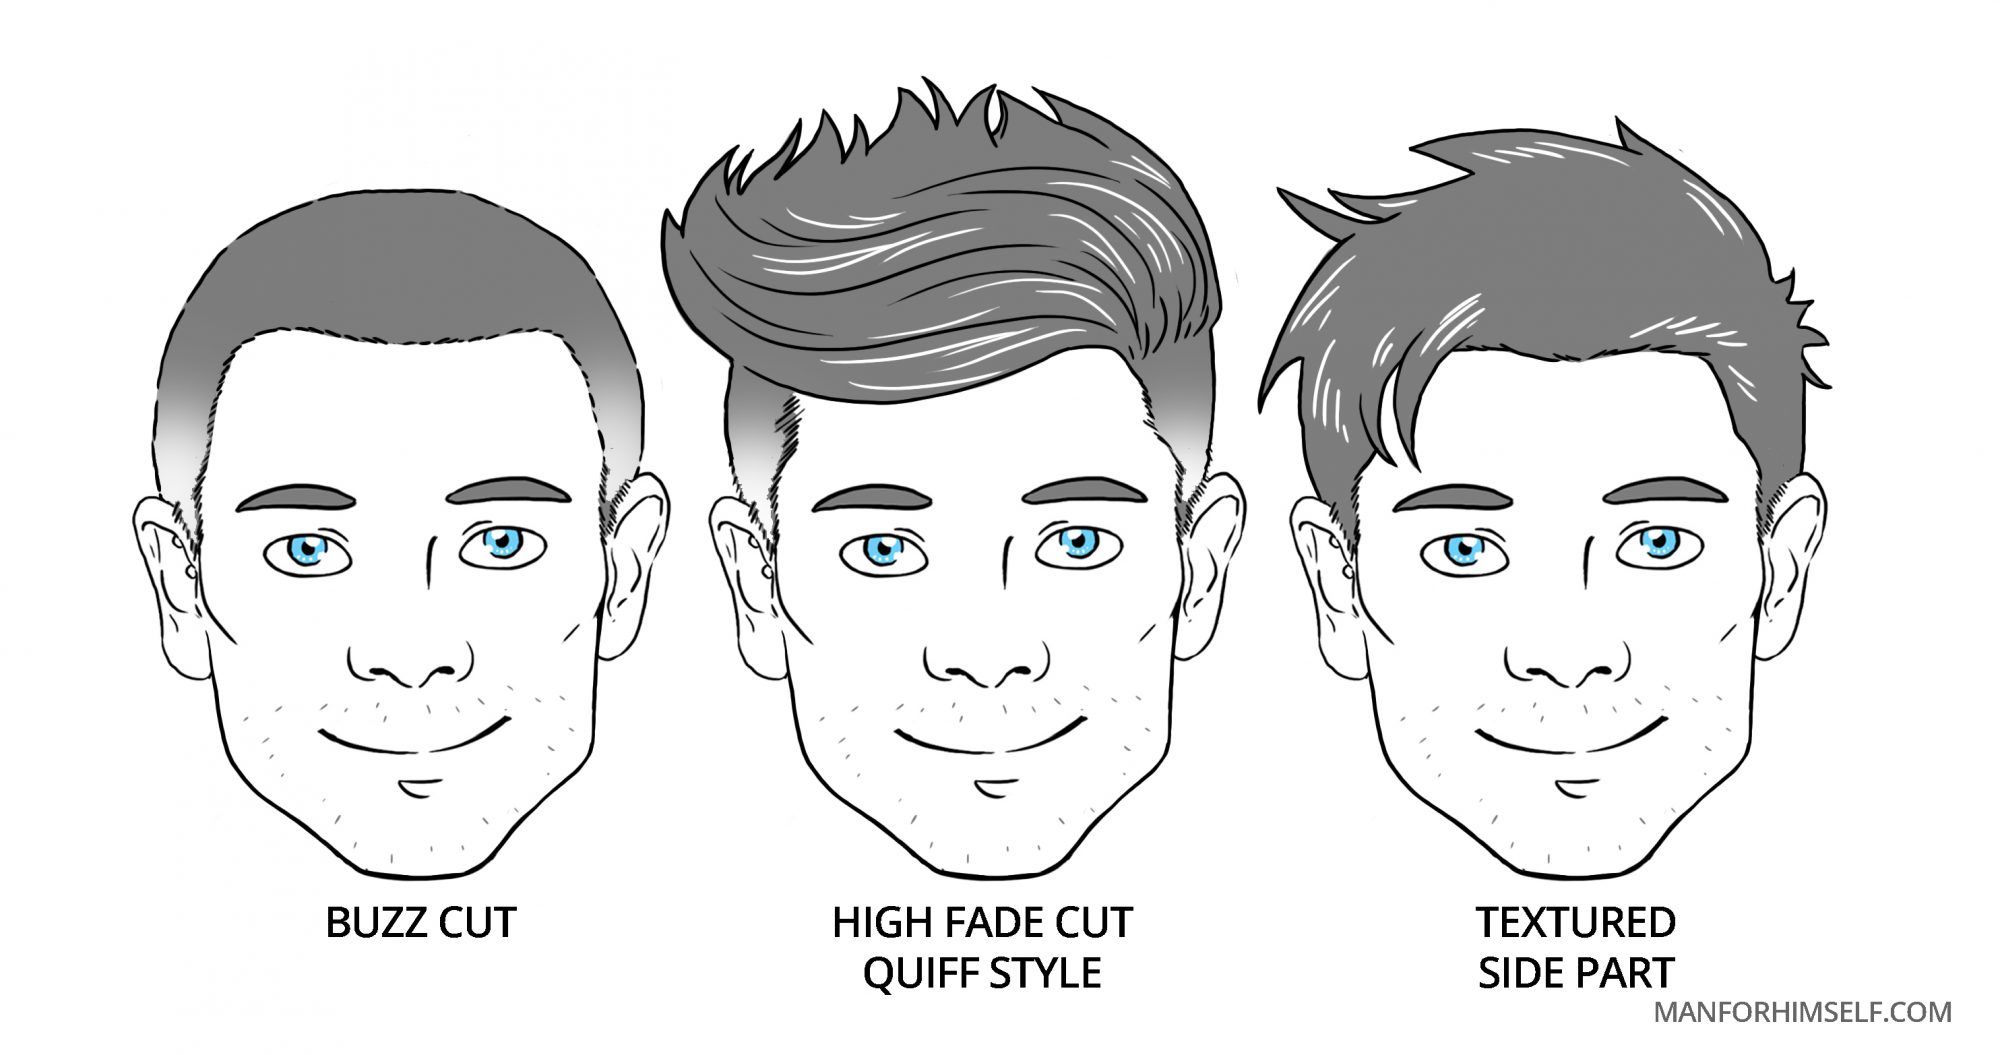 what hairstyle suits me men - Lemon8 Search